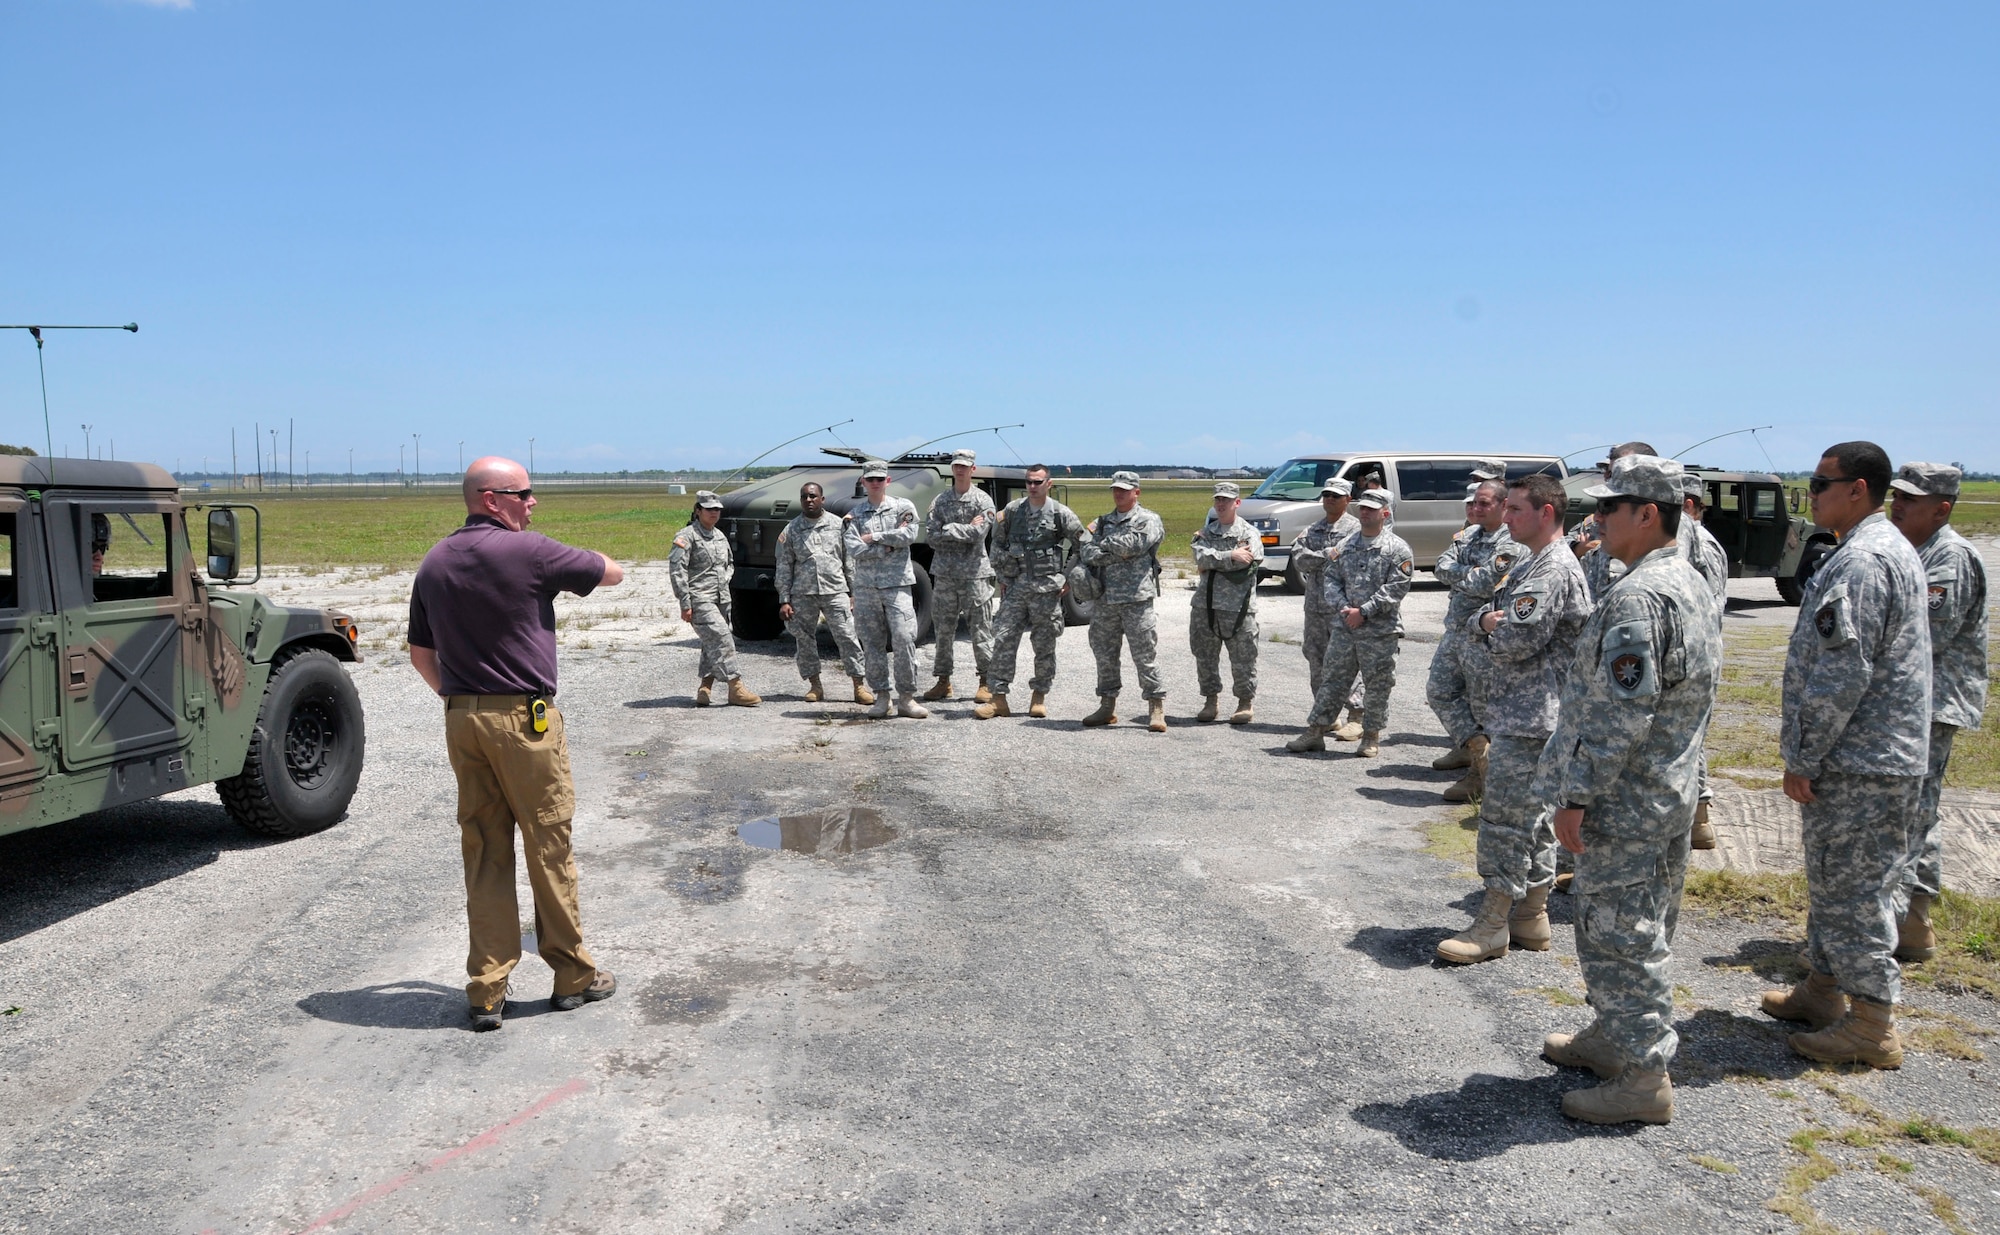 Michael Clay (left), an Army consultant who specializes in counter improvised explosive device training, speaks with soldiers from the Army’s 260th Military Intelligence Battalion Alpha Company out of Miami, Fla., at Homestead Air Reserve Base, Fla., April 6. The soldiers set up camp at the Homestead ARB’s bivouac site to conduct intelligence mission essential task list drills, tactical convoy operations training, enemy contact training, training for near and far ambushes, counter improvised explosive device training, generator training, vehicle recovery operations training, and driver lane training.  (U.S. Air Force photo/Senior Airman Nicholas Caceres)